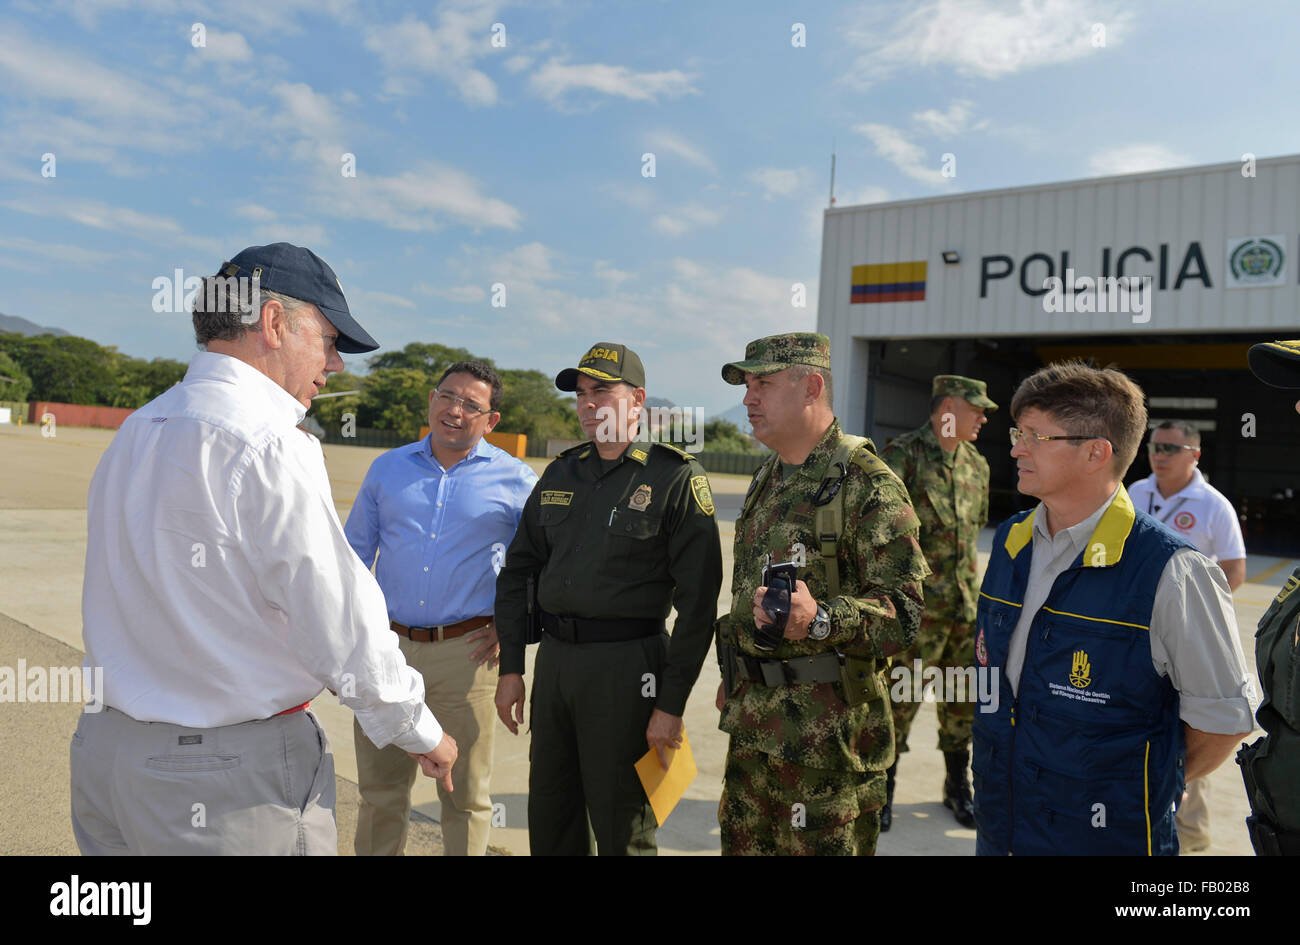 (160106) -- SANTA MARTA, Jan. 6, 2016 (Xinhua) -- Image provided by Colombia's Presidency shows Colombian President Juan Manuel Santos (1st L) being received by the Santa Marta Mayor Rafael Alejandro Martinez (2nd L), region Police and Army Commanders, and the Director of the Unit for Disaster Risk Management (UNGRD, for its acronym in Spanish) Carlos Ivan Marquez Perez (1st R), prior the meeting of pursuit the plans to face El Nino Phenomenon, in Santa Marta, Colombia, Jan. 6, 2016. Colombian President Juan Manuel Santos led the meeting in which the plans to face El Nino Phenomenon were evalu Stock Photo